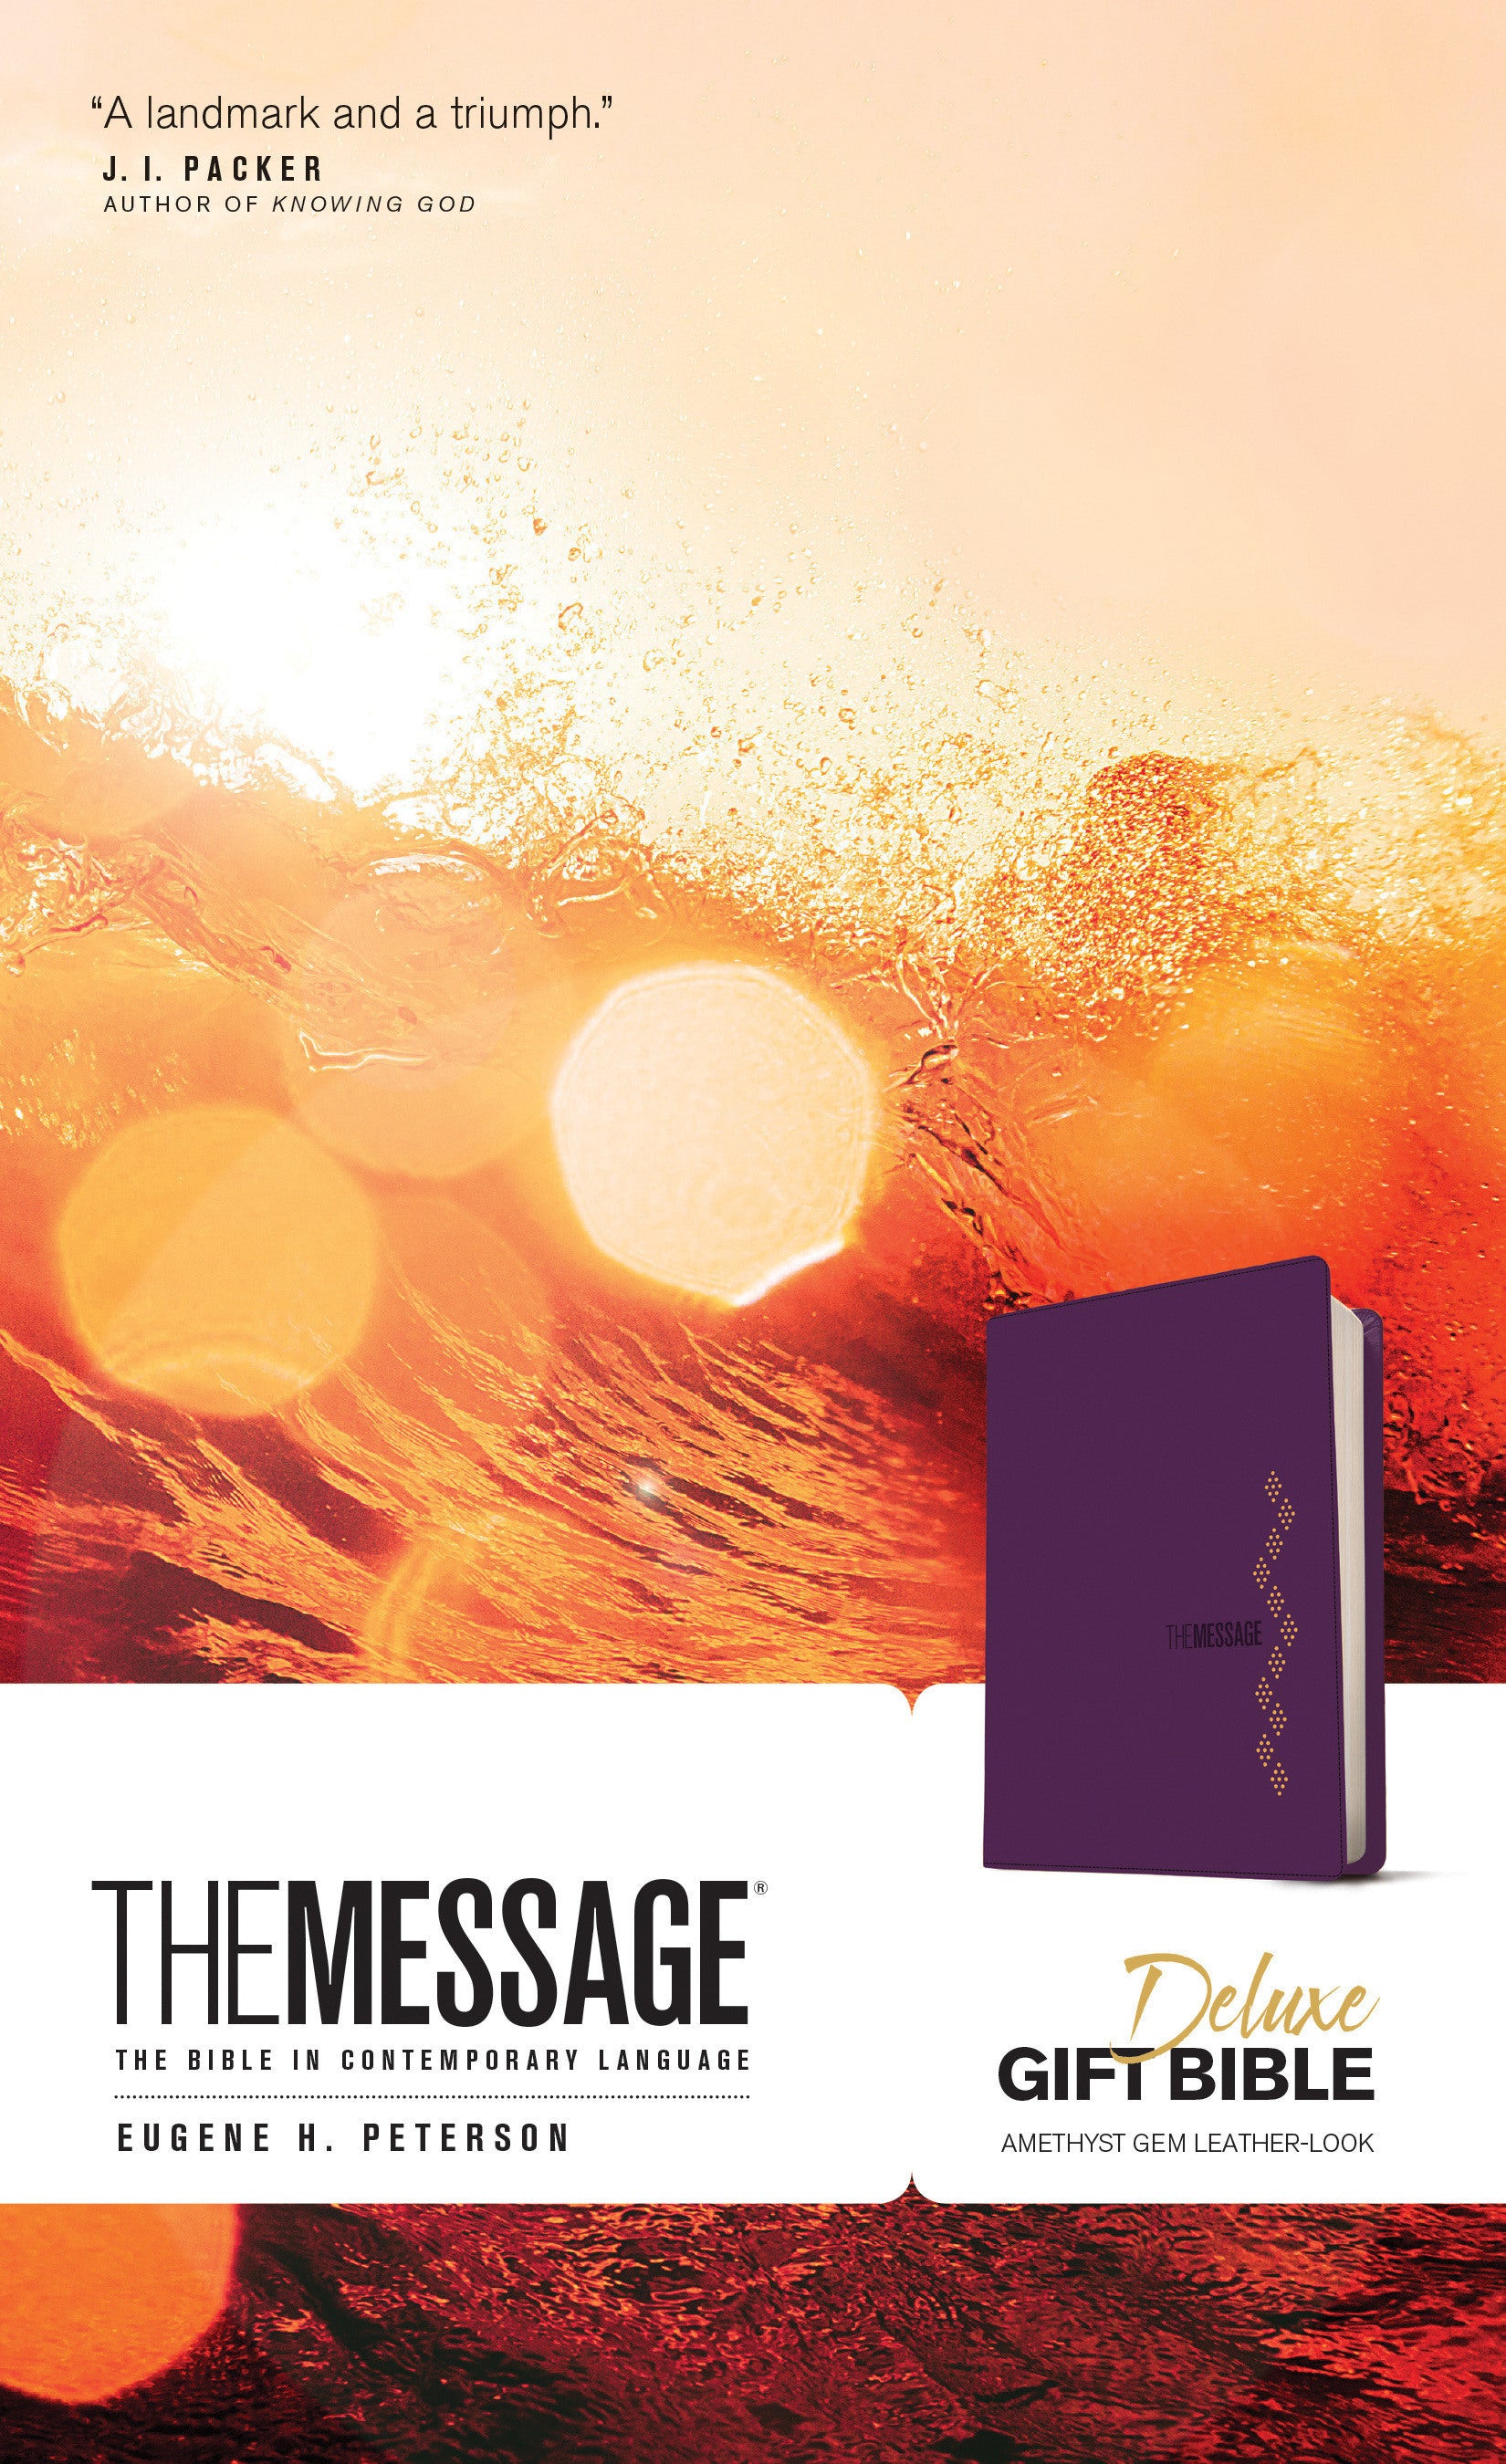 Image of Eugene Peterson, The Message, Bible, Deluxe Gift, Bible, Purple, Imitation Leather other